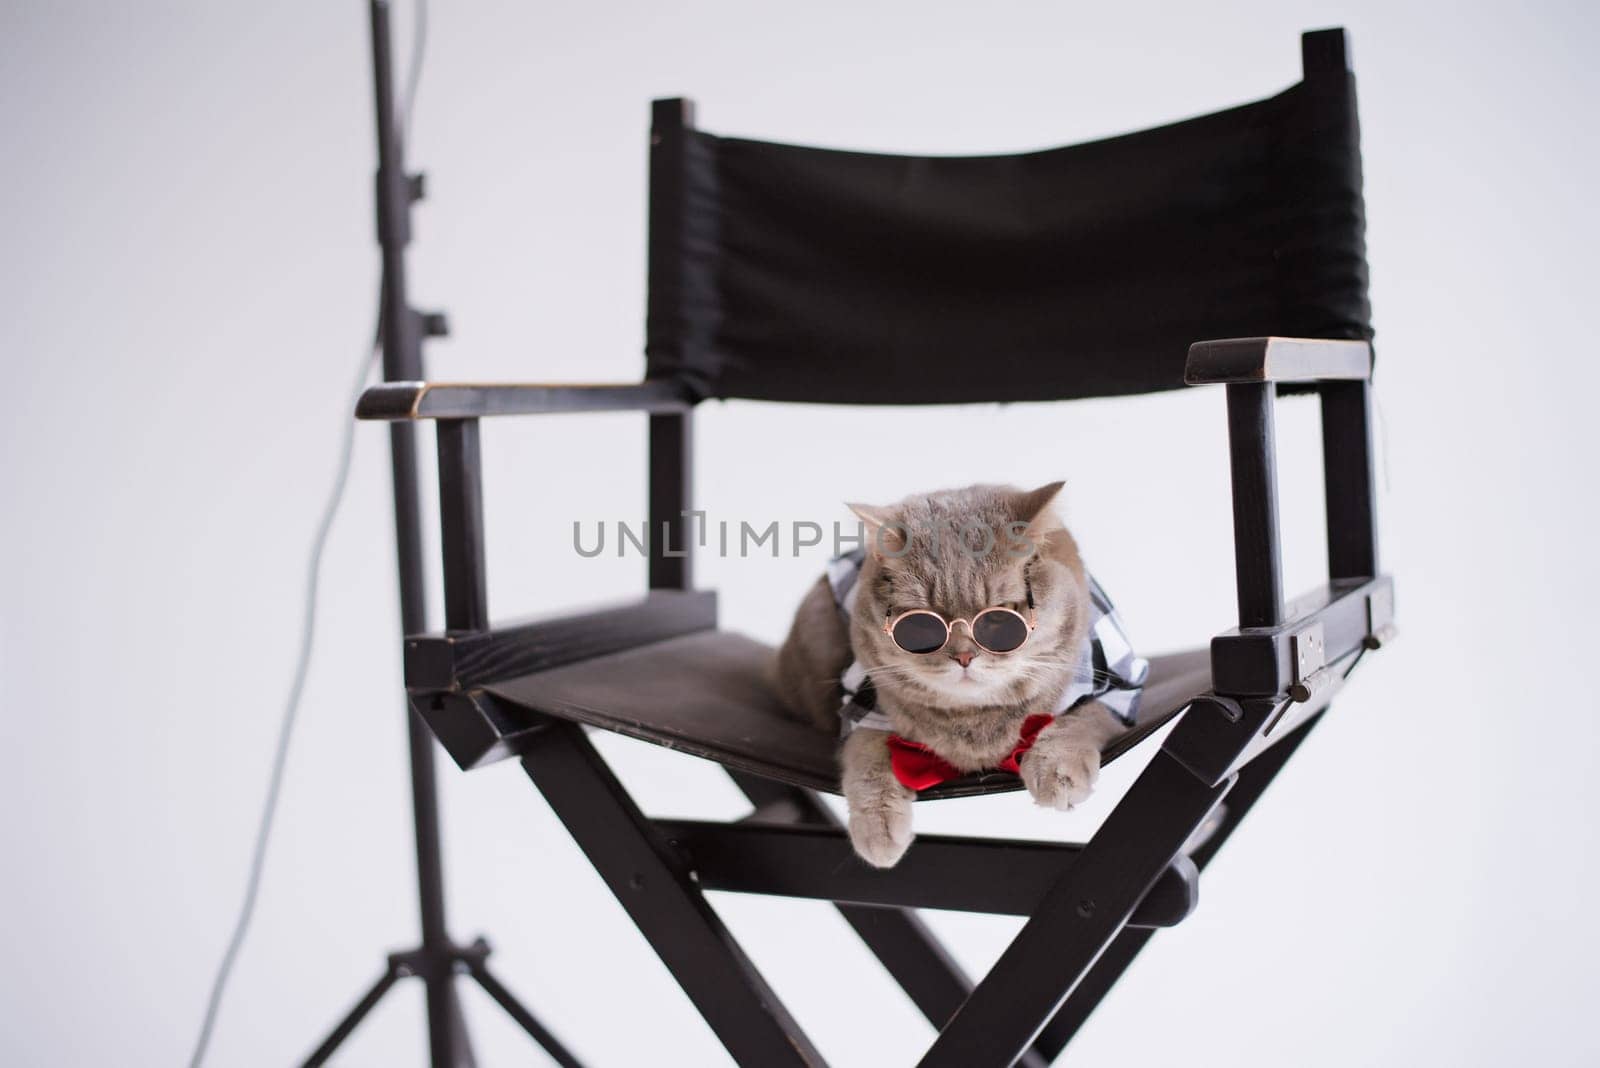 A Scottish straight eared cat in sunglasses and a red tie sits on a black production chair in a white video production studio